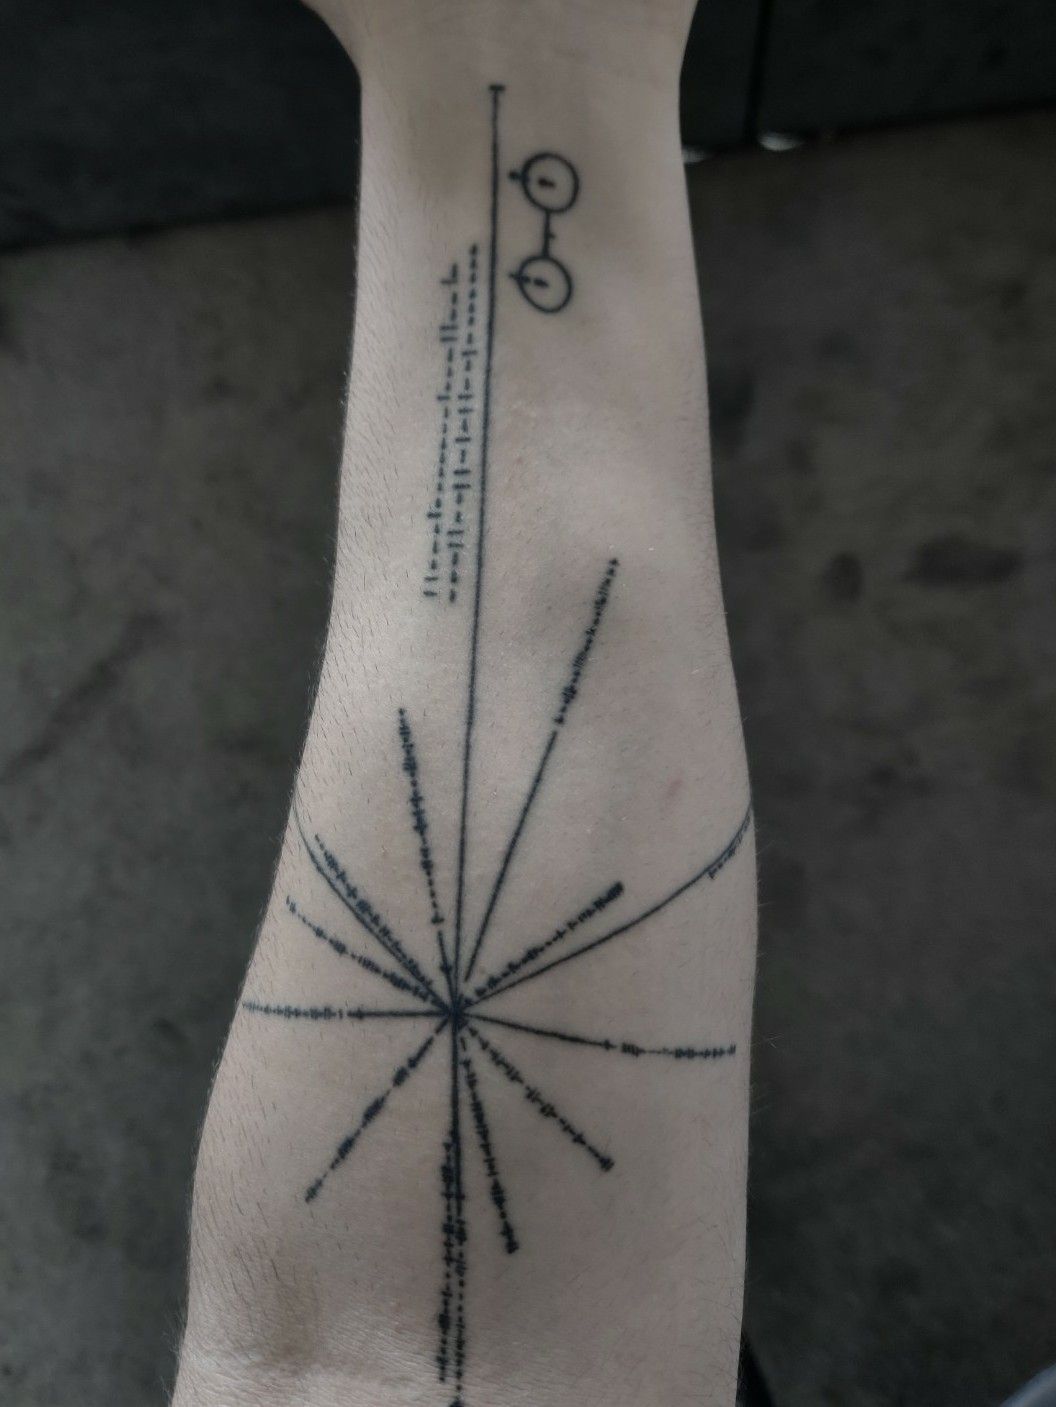 Niless tattoo of the Pioneer Plaque Image Credit Geeky Tattoos   Download Scientific Diagram